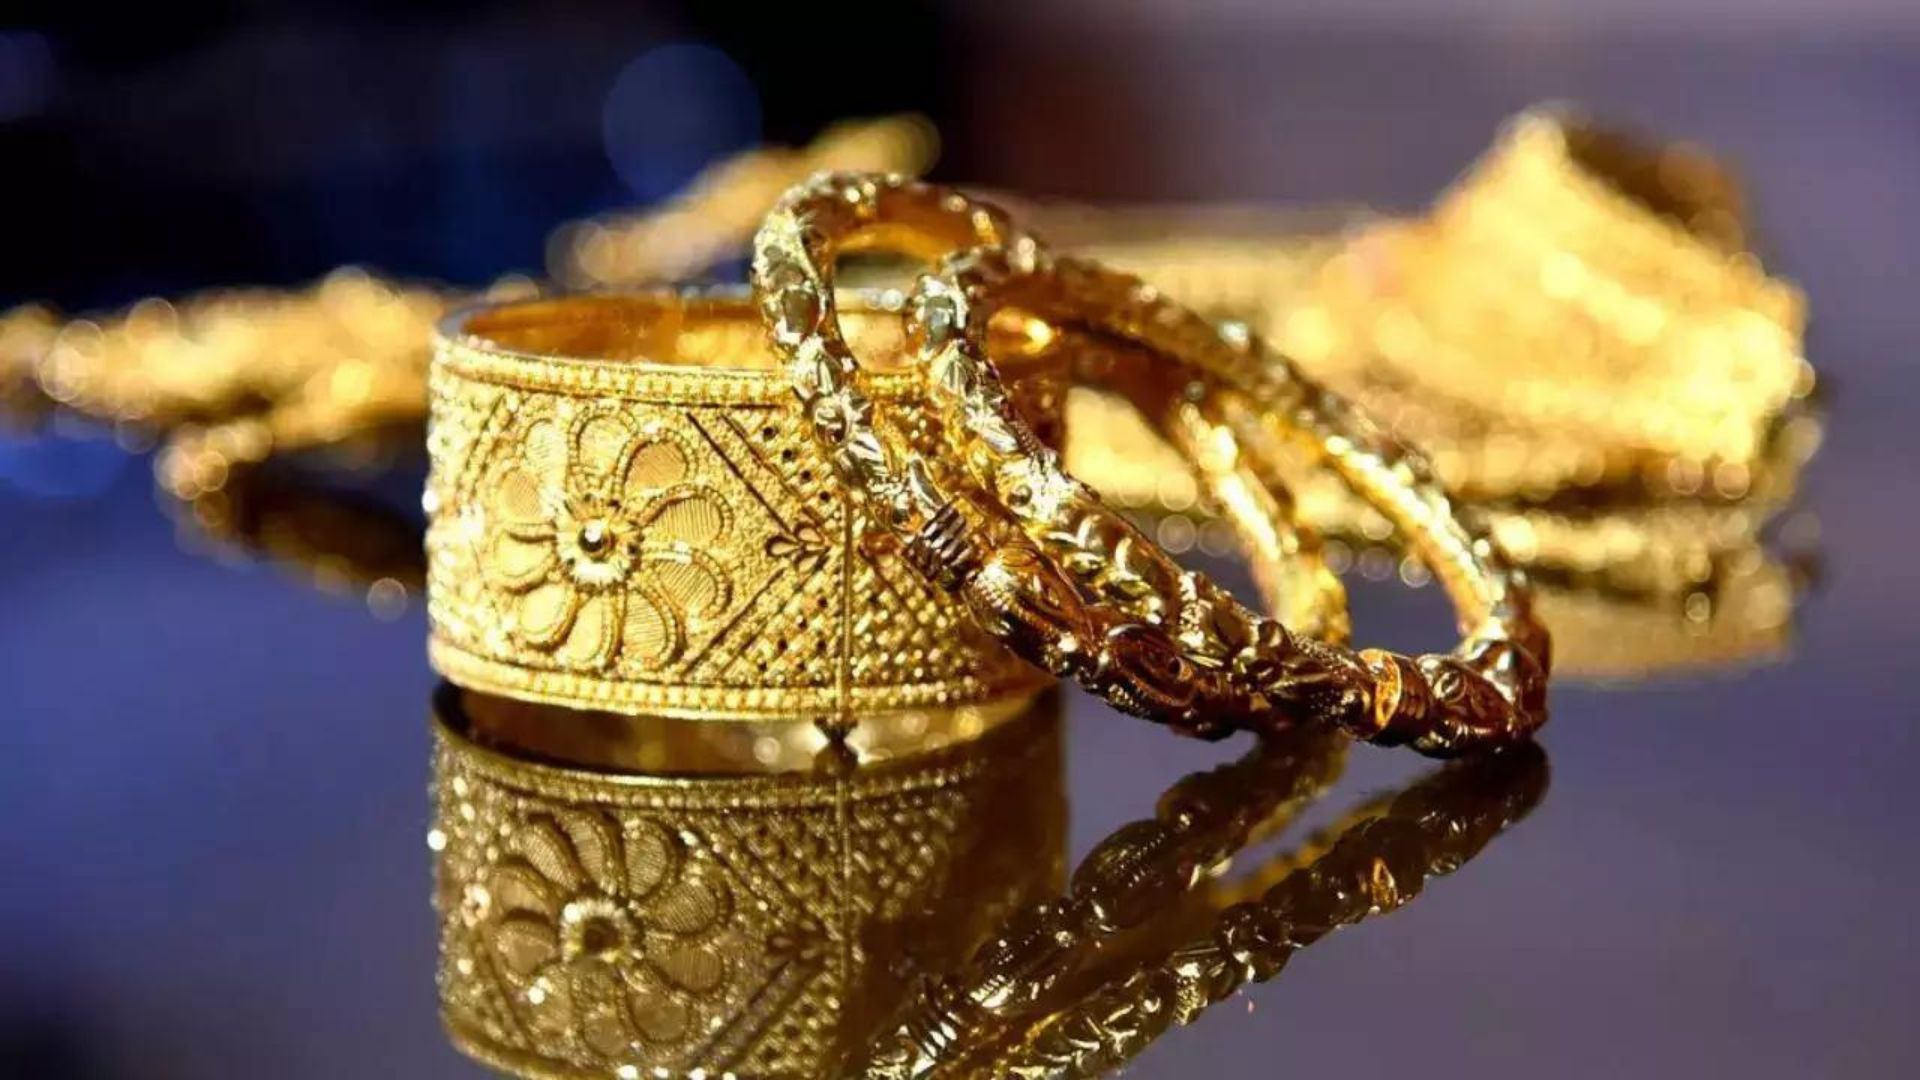 Robbers Pose As Customers To Steal Jewelry From Tanishq Store In Bihar’s Purnea